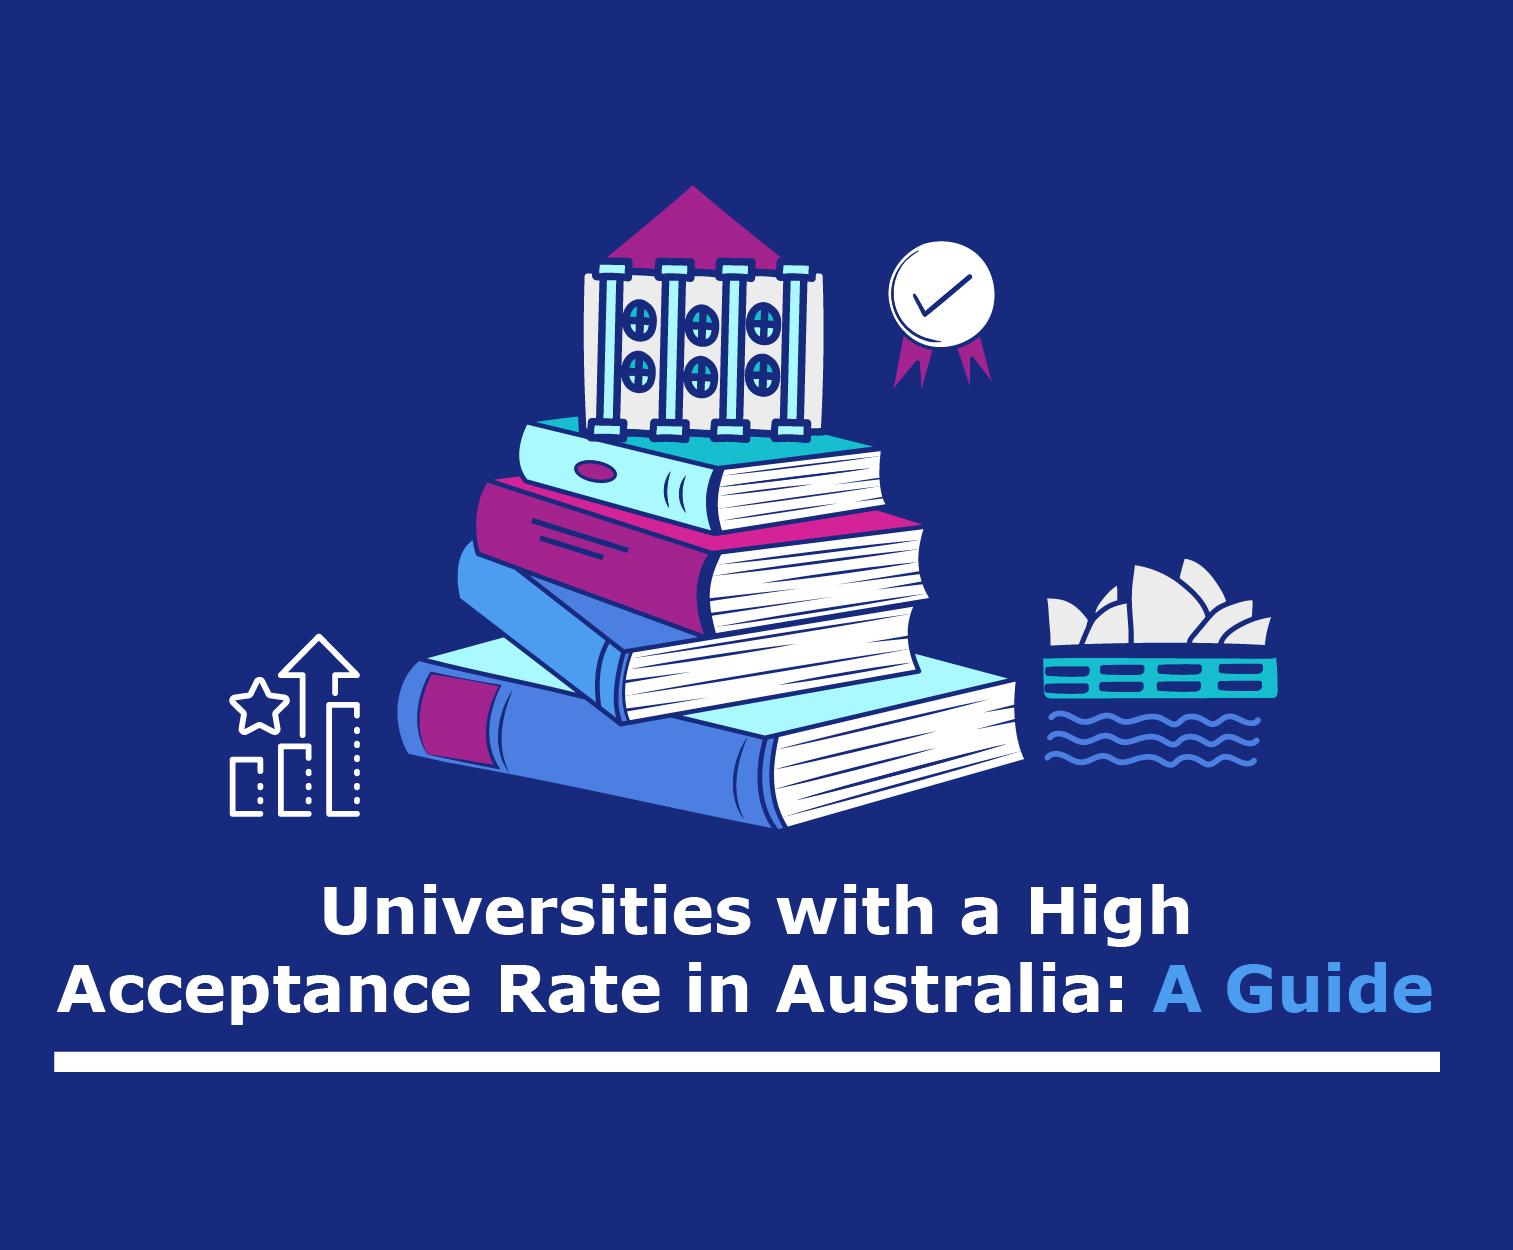 Universities with a High Acceptance Rate in Australia: A Guide